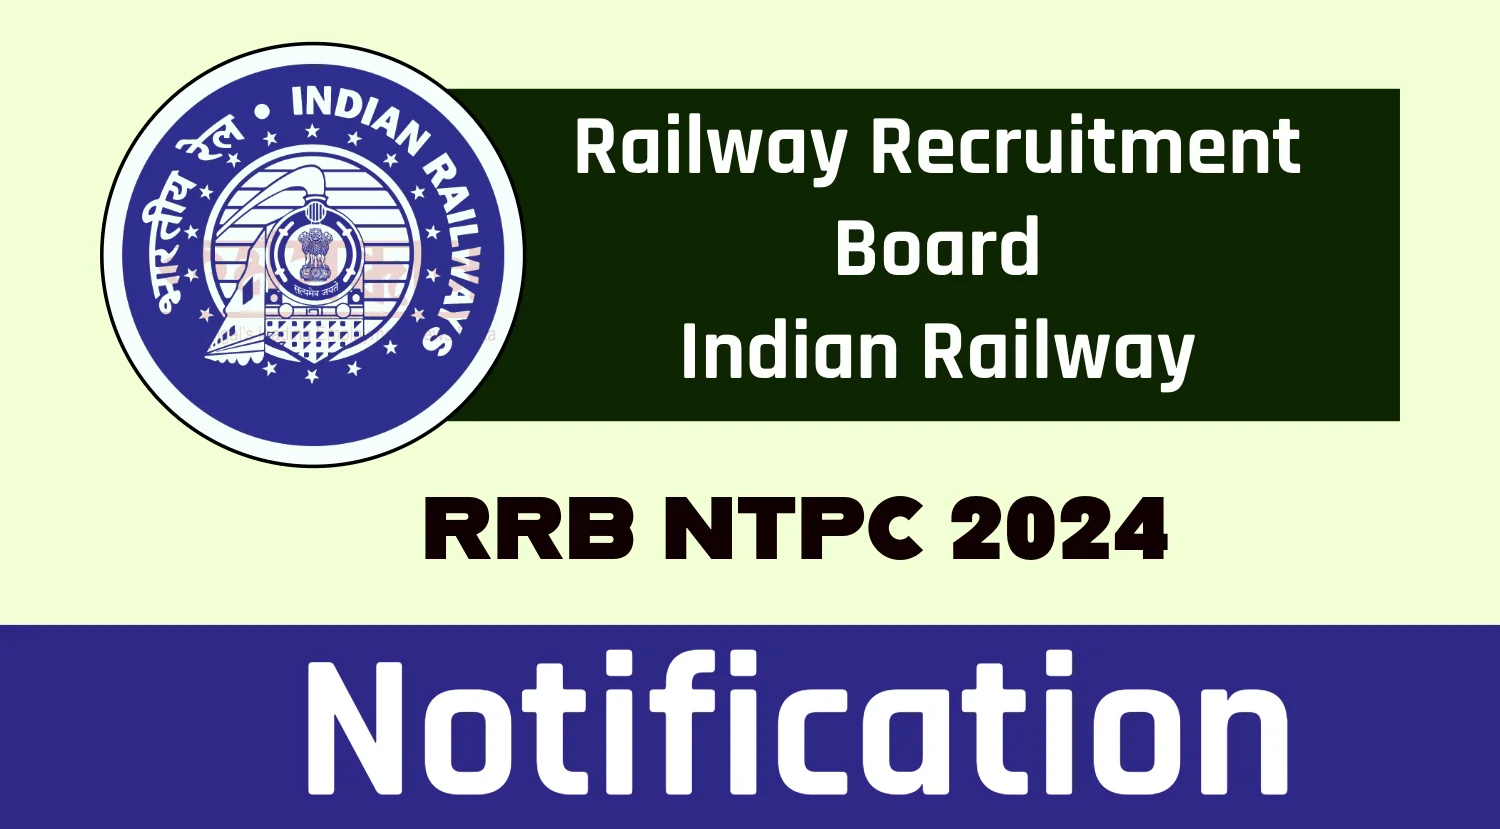 RRB NTPC Notification 2024, Check Eligibility, Syllabus, Exam Pattern and How to ApplyRRB NTPC Notification 2024, Check Eligibility, Syllabus, Exam Pattern and How to Apply